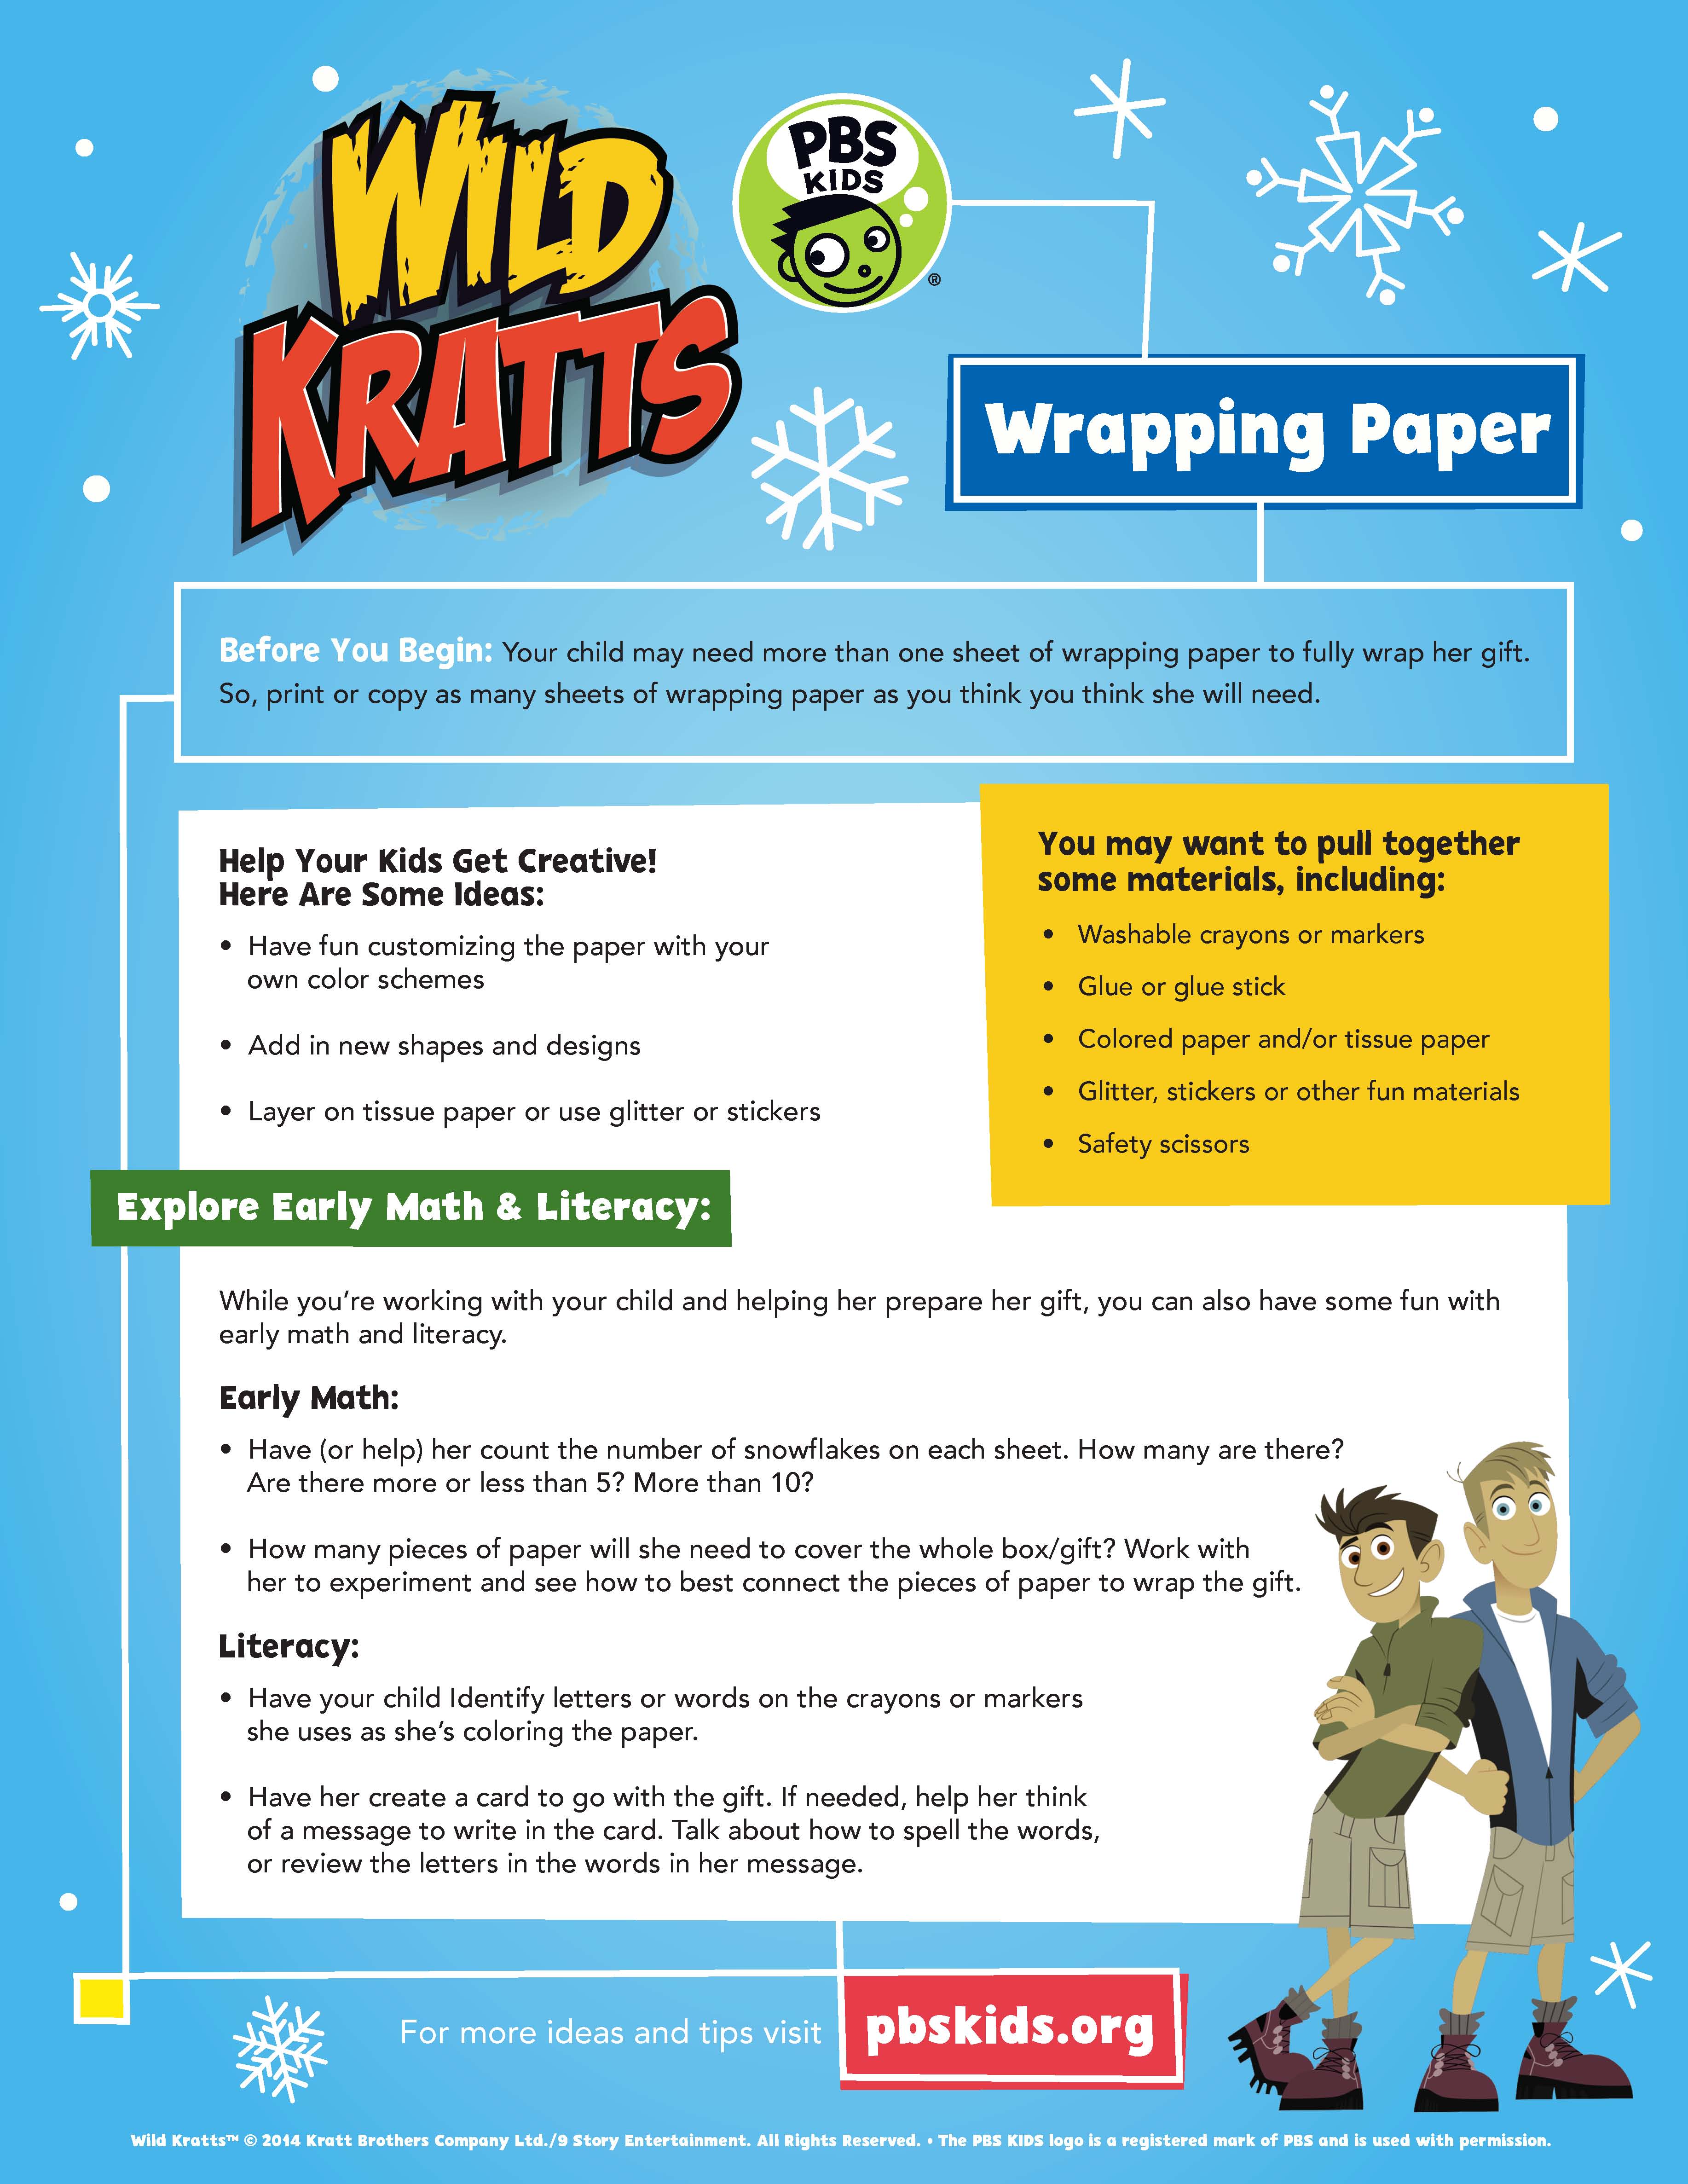 Wild kratts_wrapping paper_Page_1